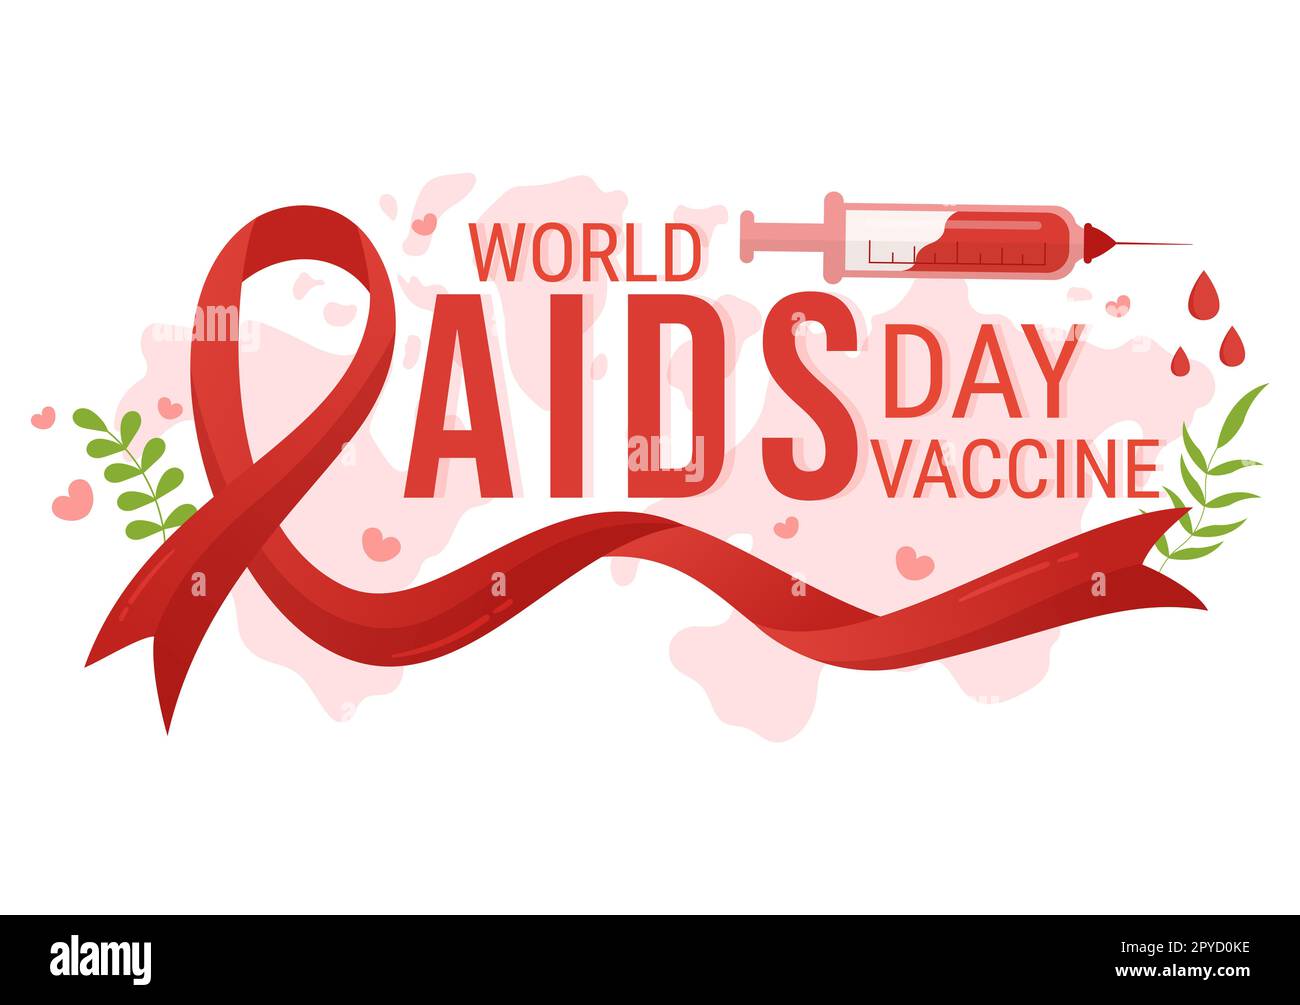 World Aids Vaccine Day Illustration to Prevention and Awareness Health Care in Flat Cartoon Hand Drawn for Web Banner or Landing Page Templates Stock Photo